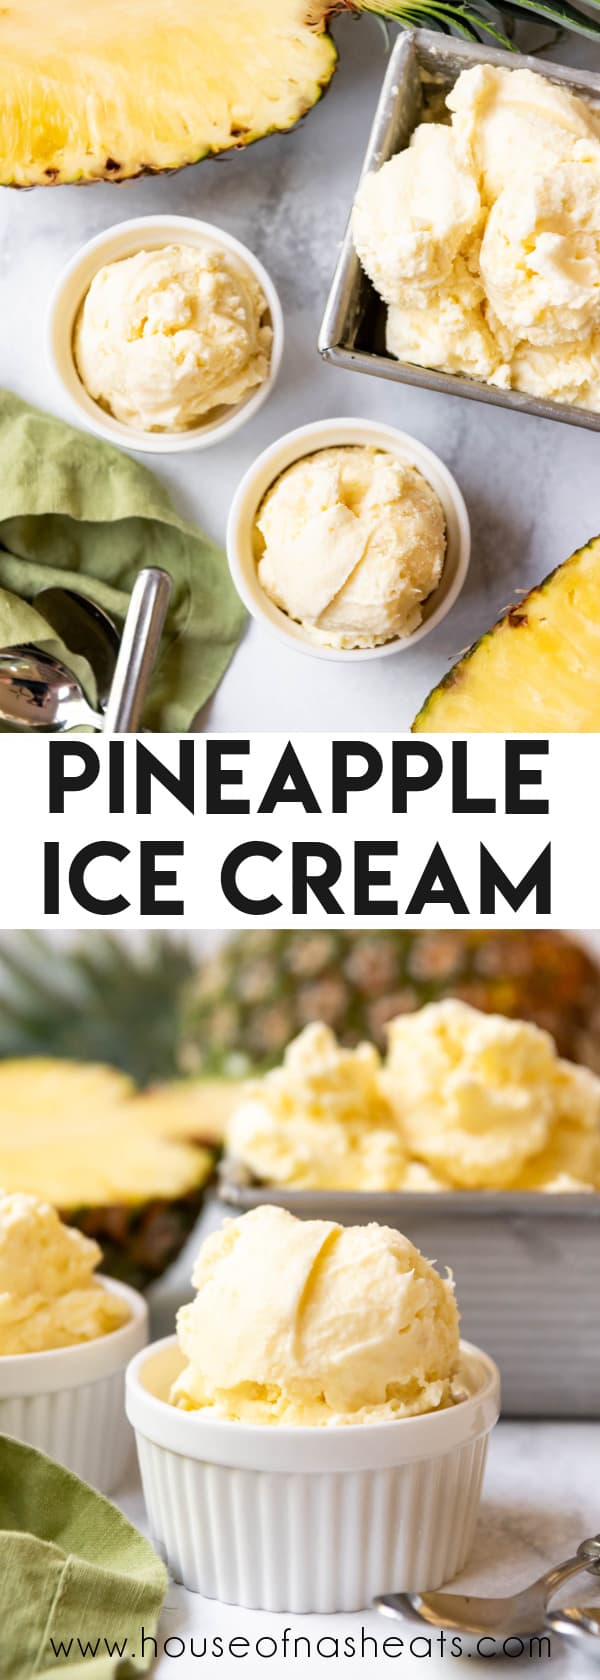 A collage of images of pineapple ice cream with text overlay.